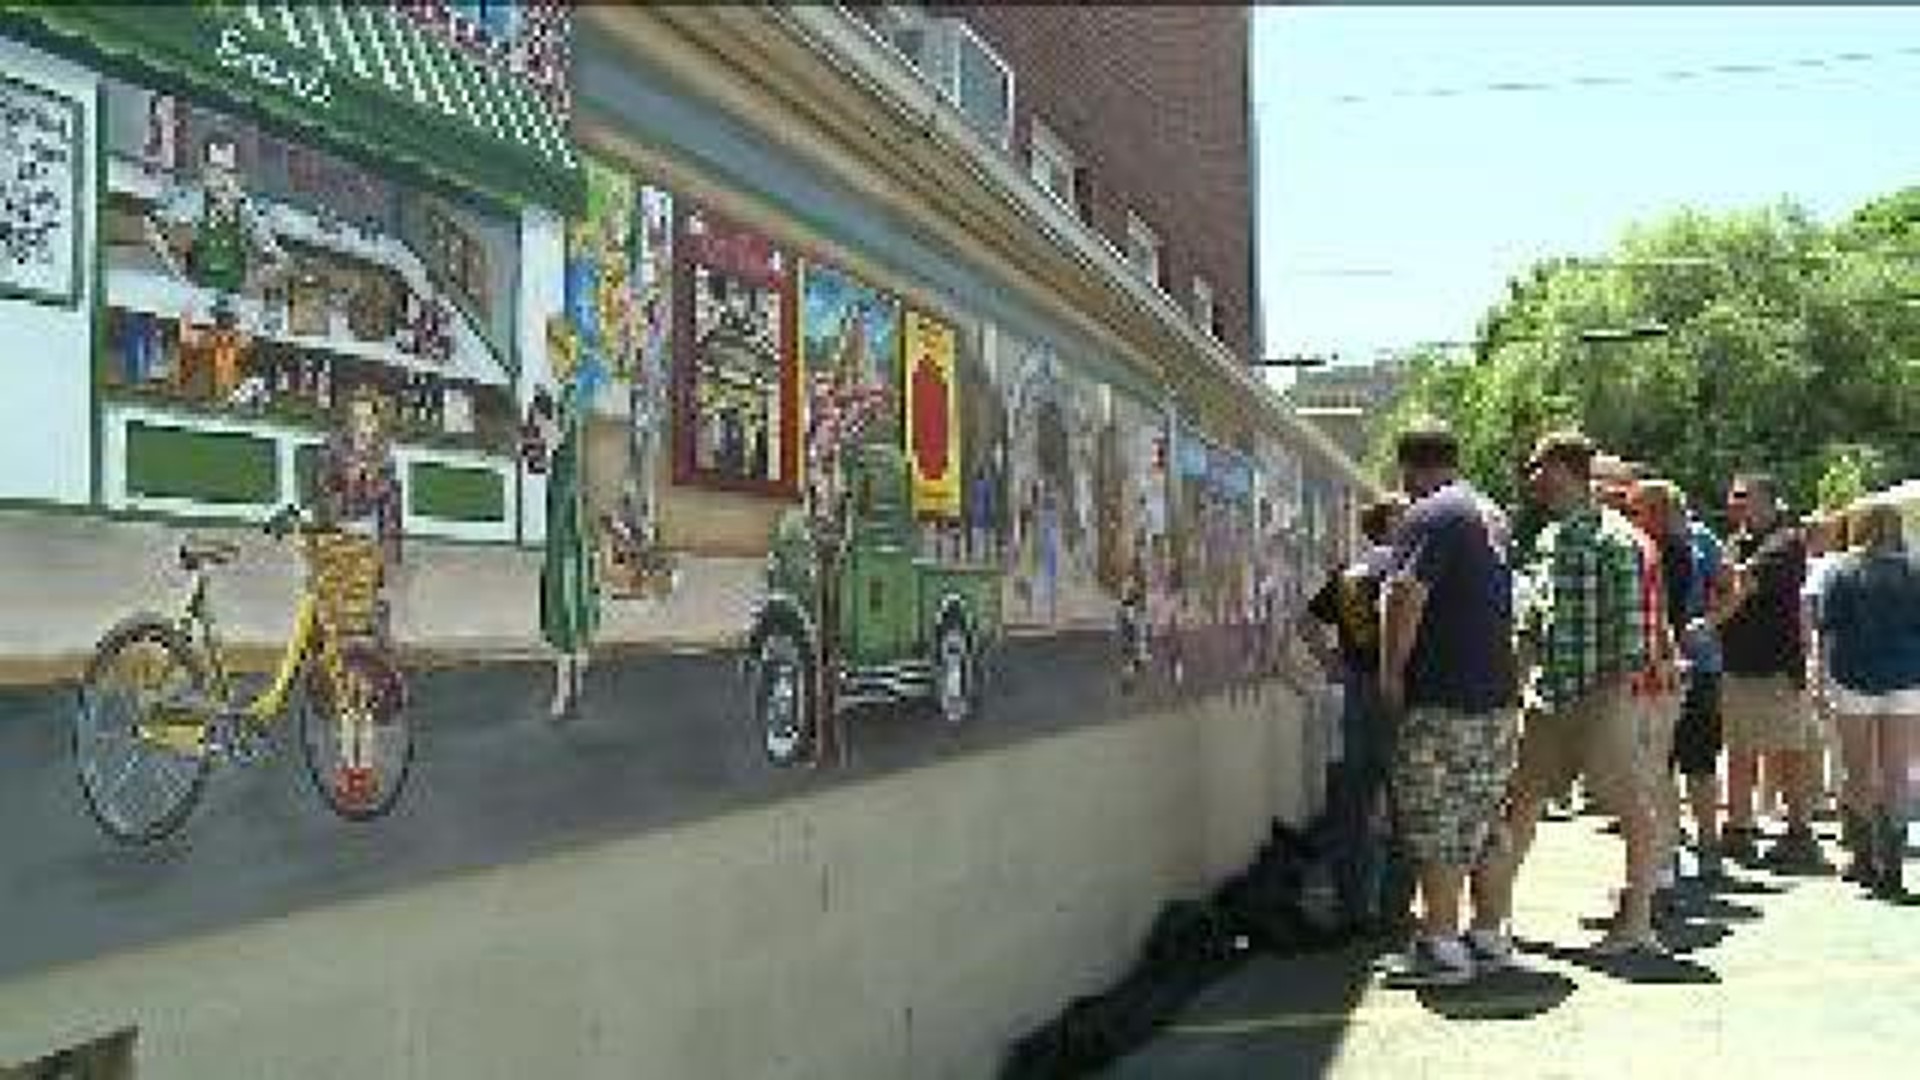 New Mural Depicts History of Coal Township